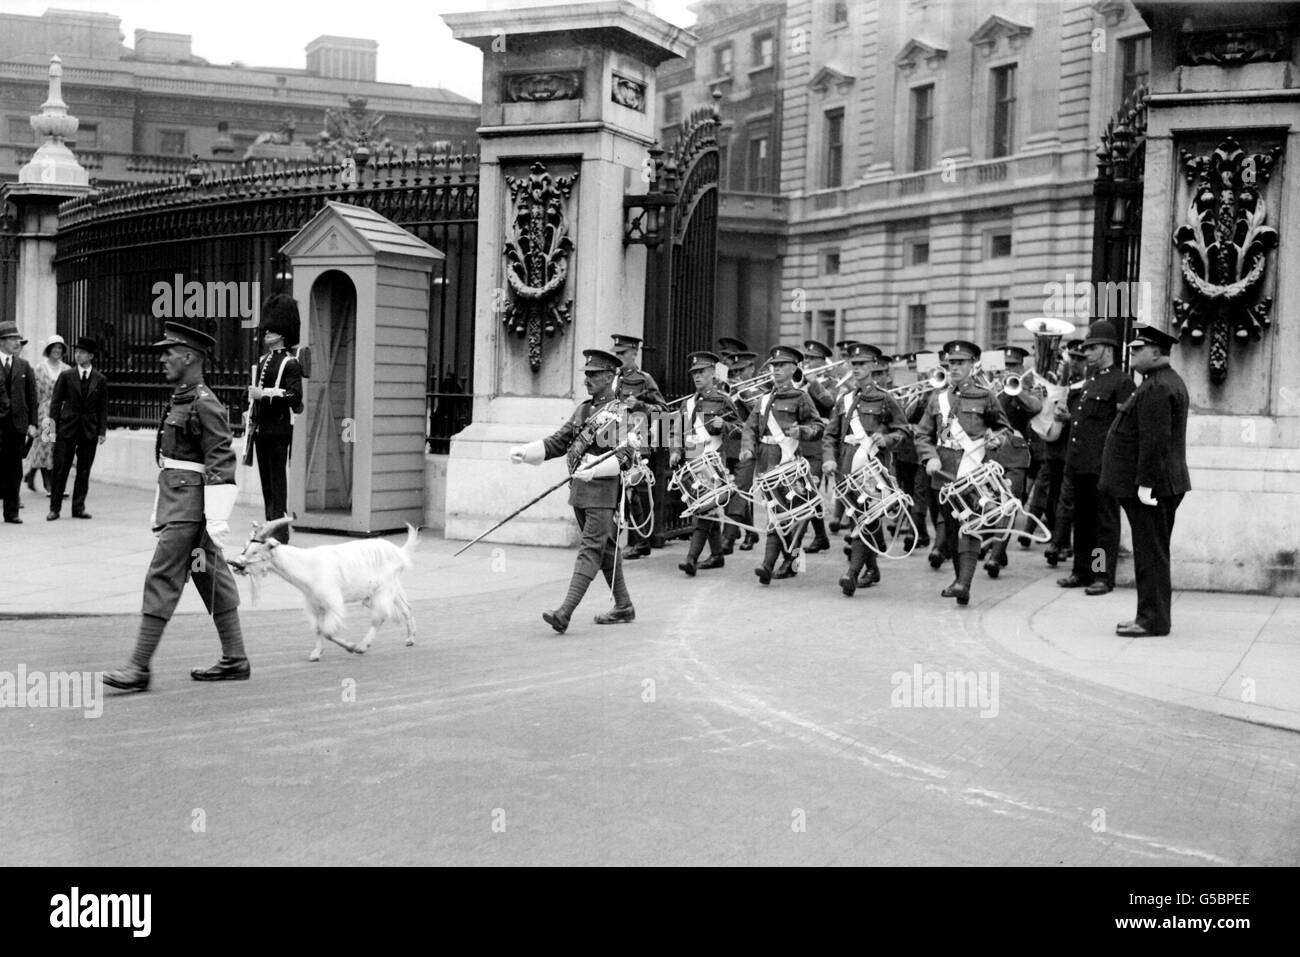 The British Army - Interwar - Royal Welch Fusiliers - London - 1932 Stock Photo